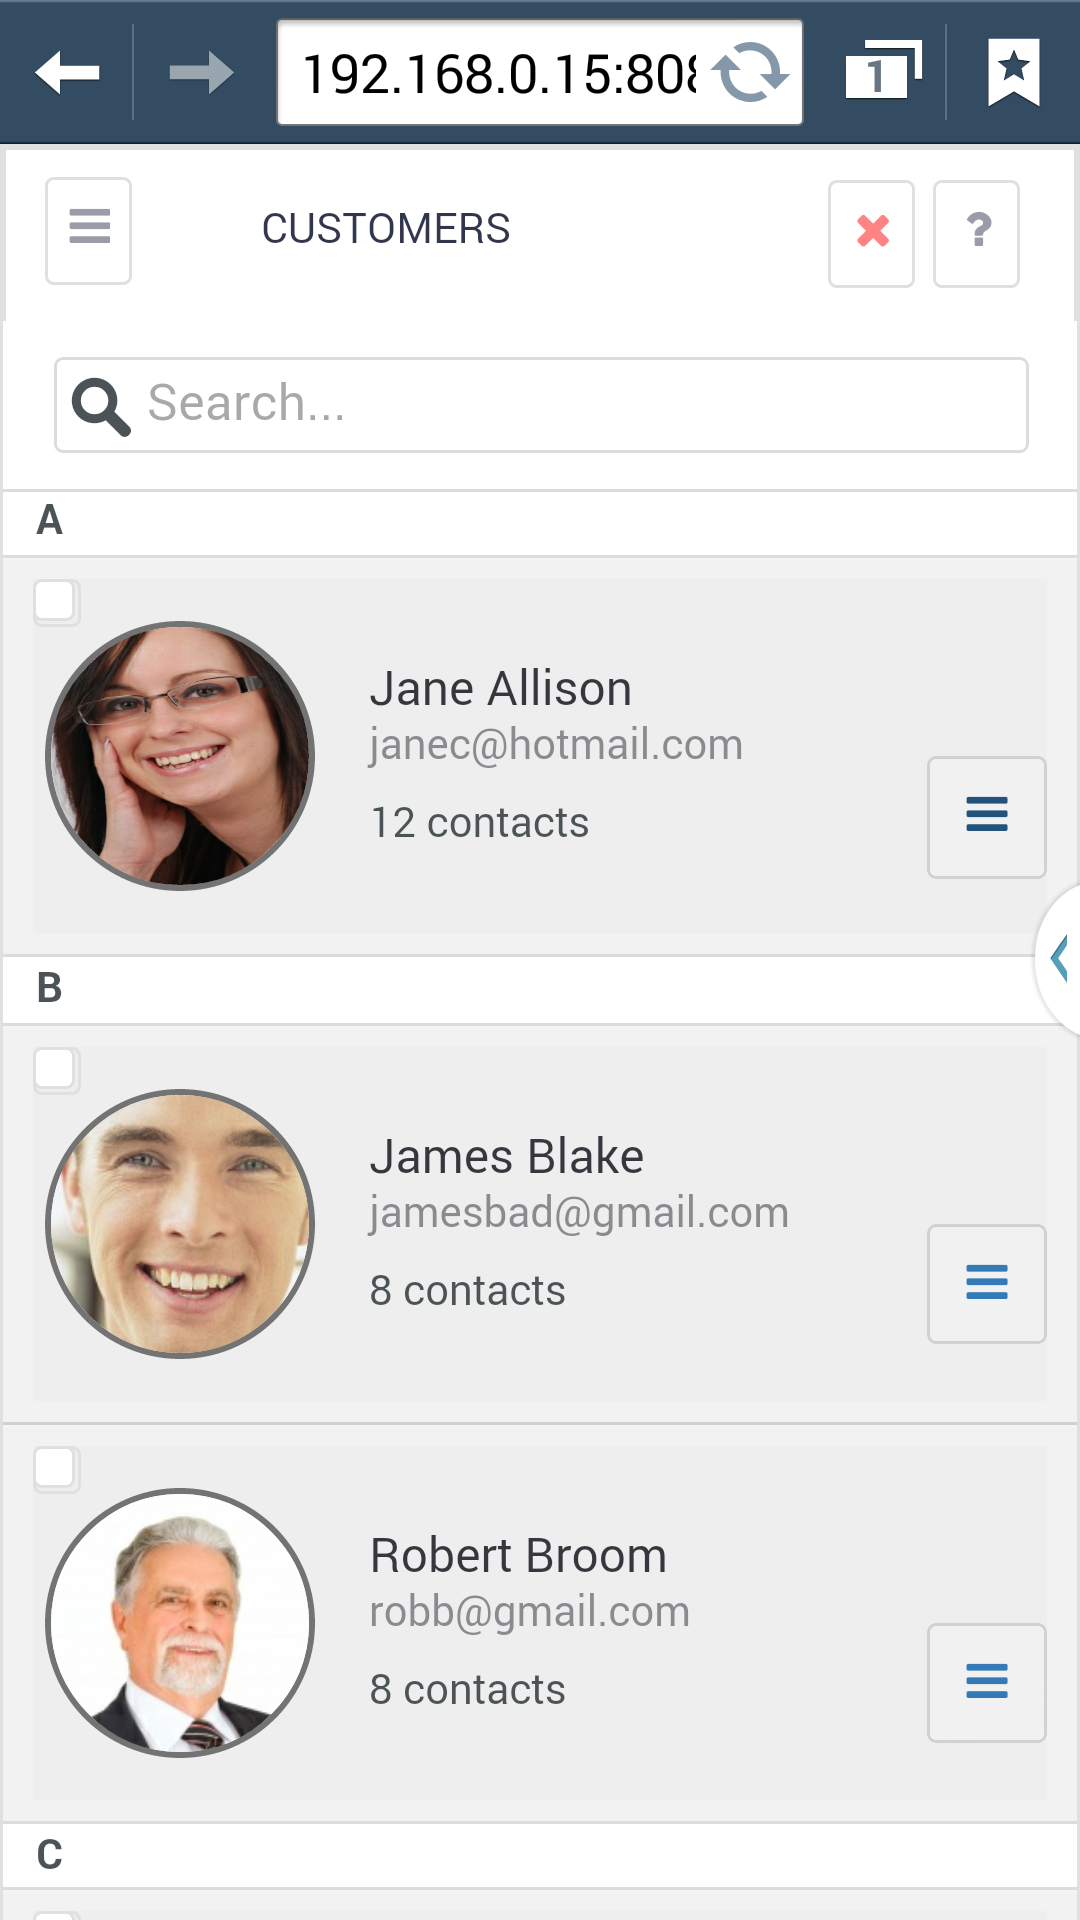 Mobile version of a CRM sample application